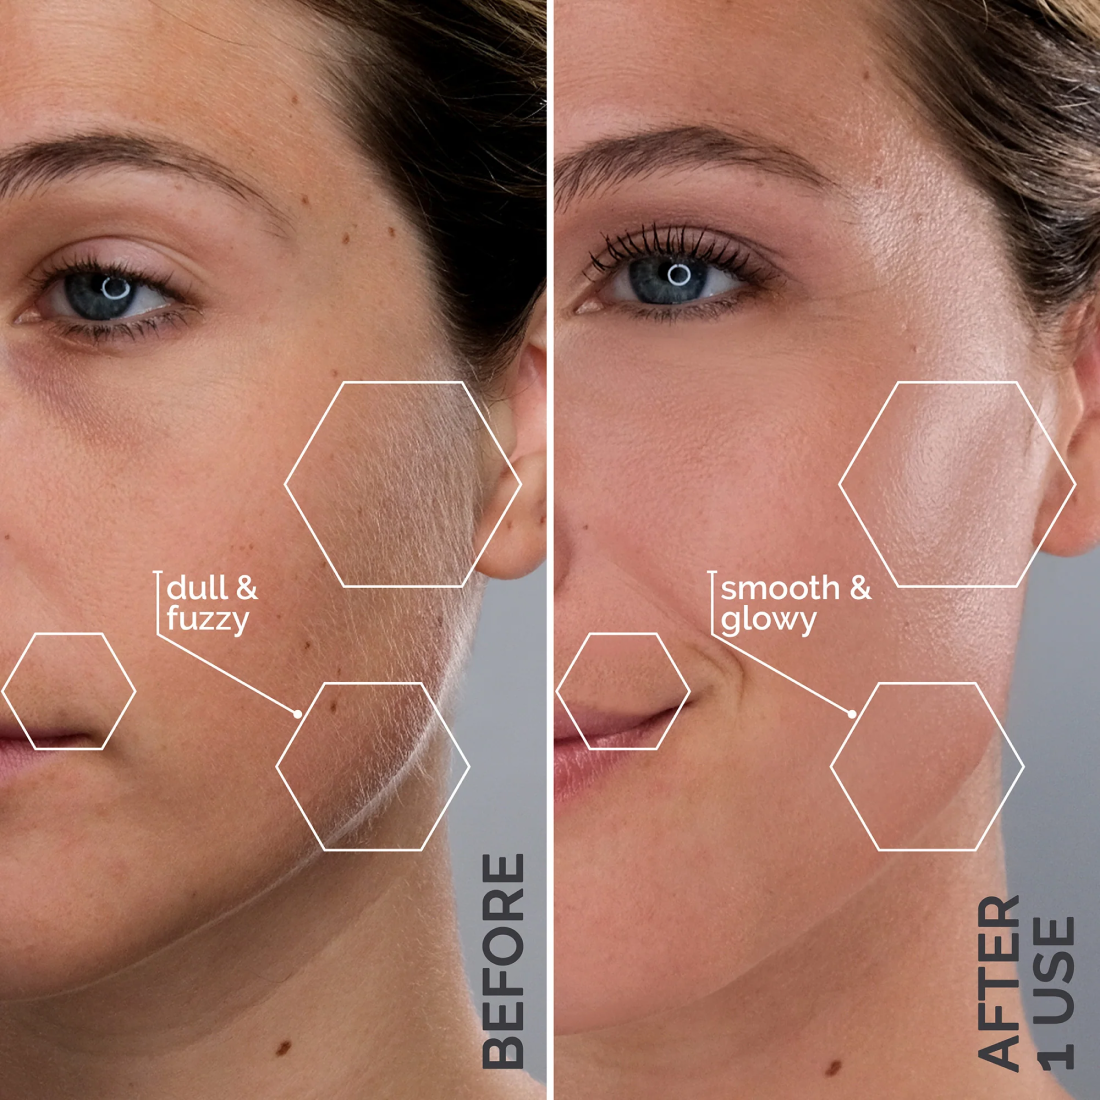 Lavender Lust .Close-up comparison of a woman's face showing skin texture before and after using Michael Todd Beauty's 4 in 1 Dermaplaning & Post Treatment System, with marked improvements in smoothness and glow.